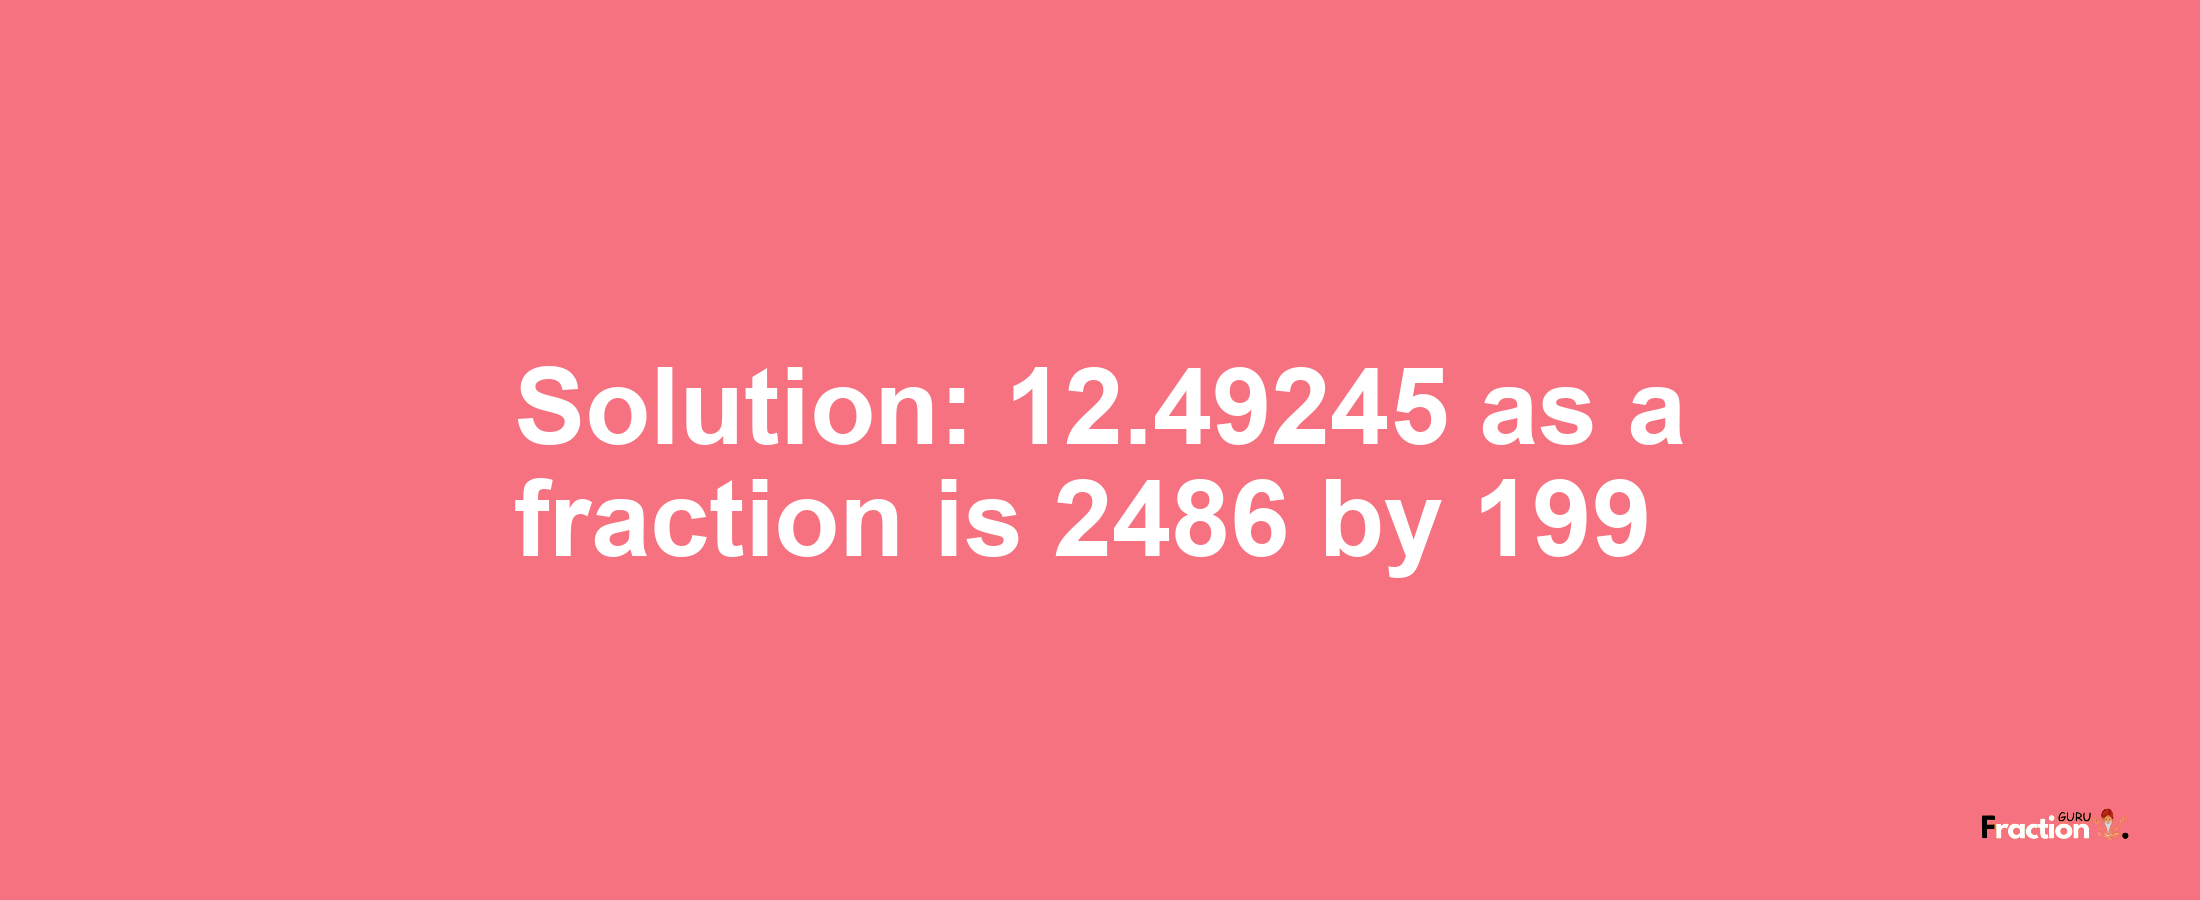 Solution:12.49245 as a fraction is 2486/199